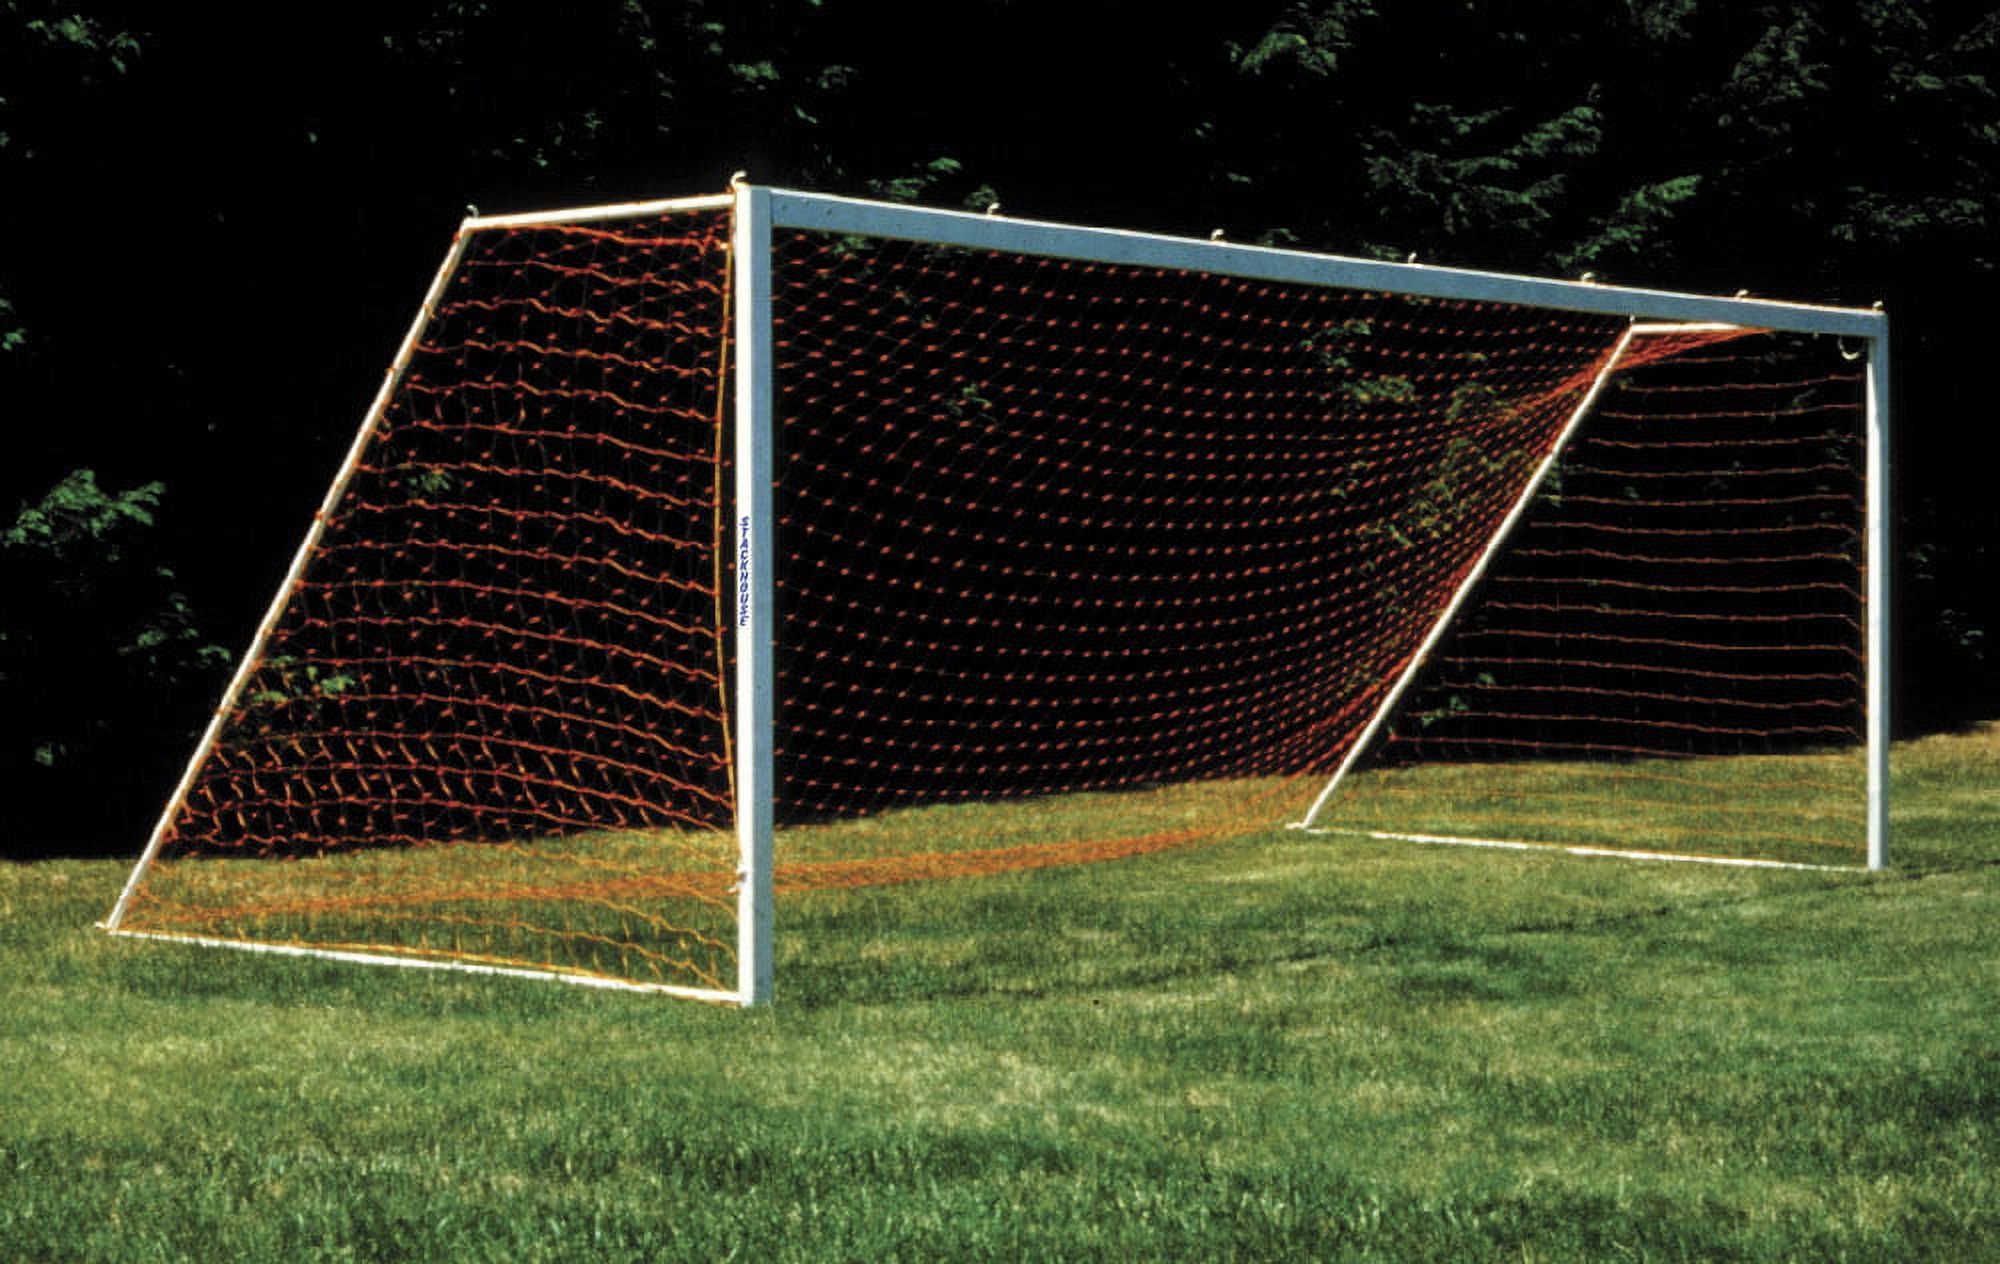 Alumagoal 24' x 8' Soccer Replacement Net - image 2 of 2